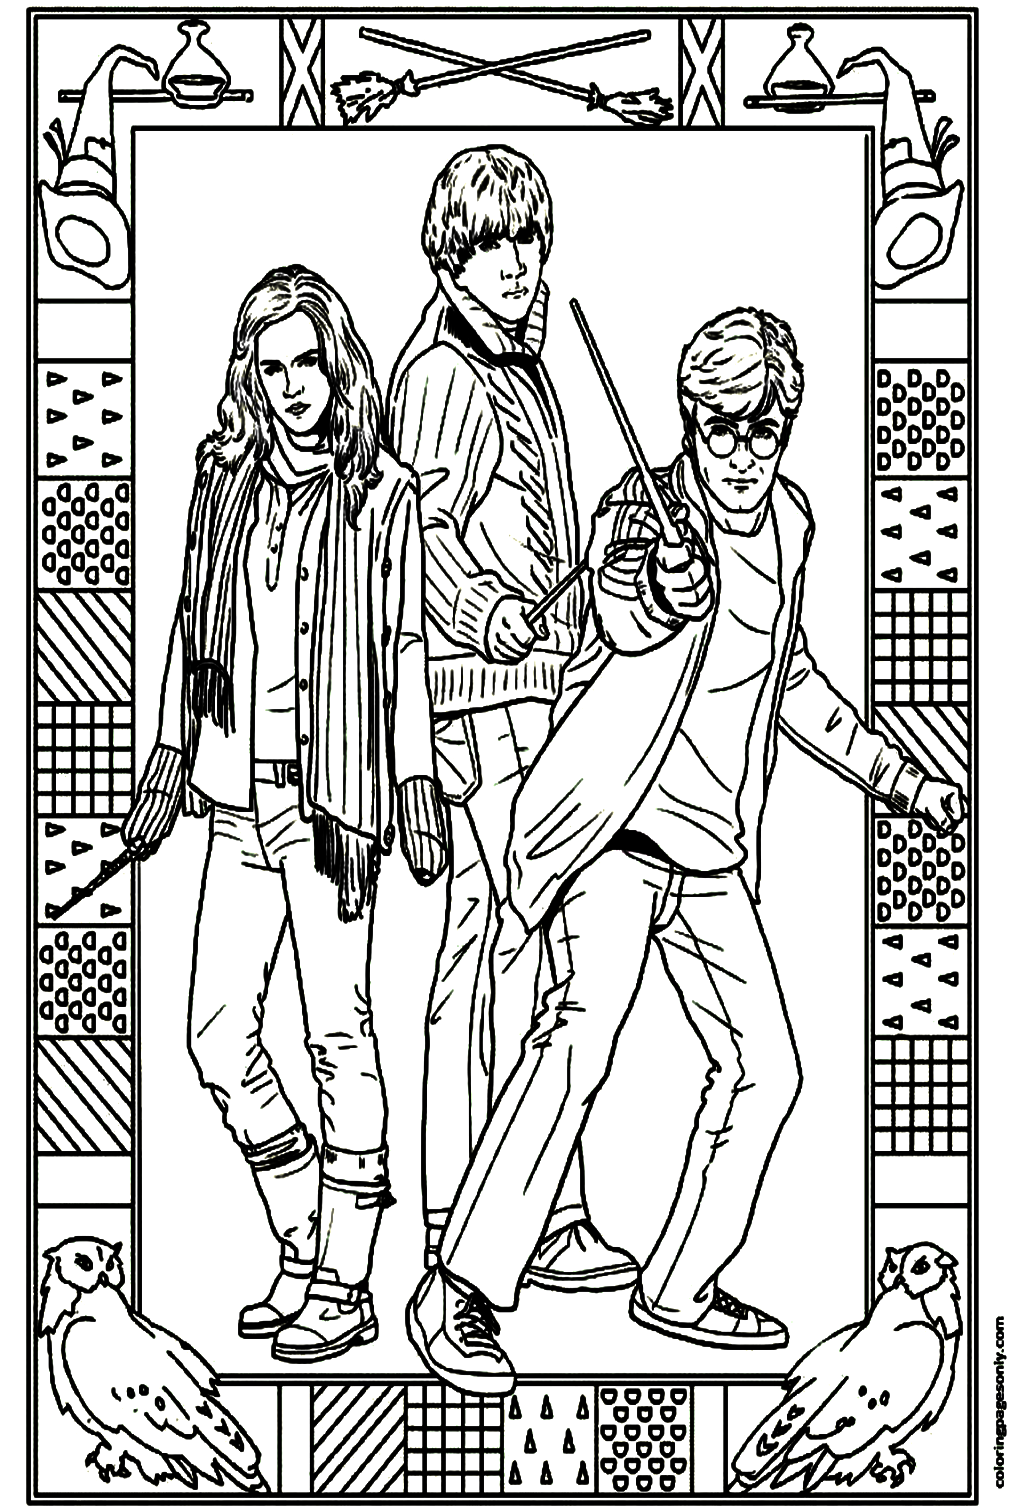 Harry, Hermione and Ron Coloring Pages